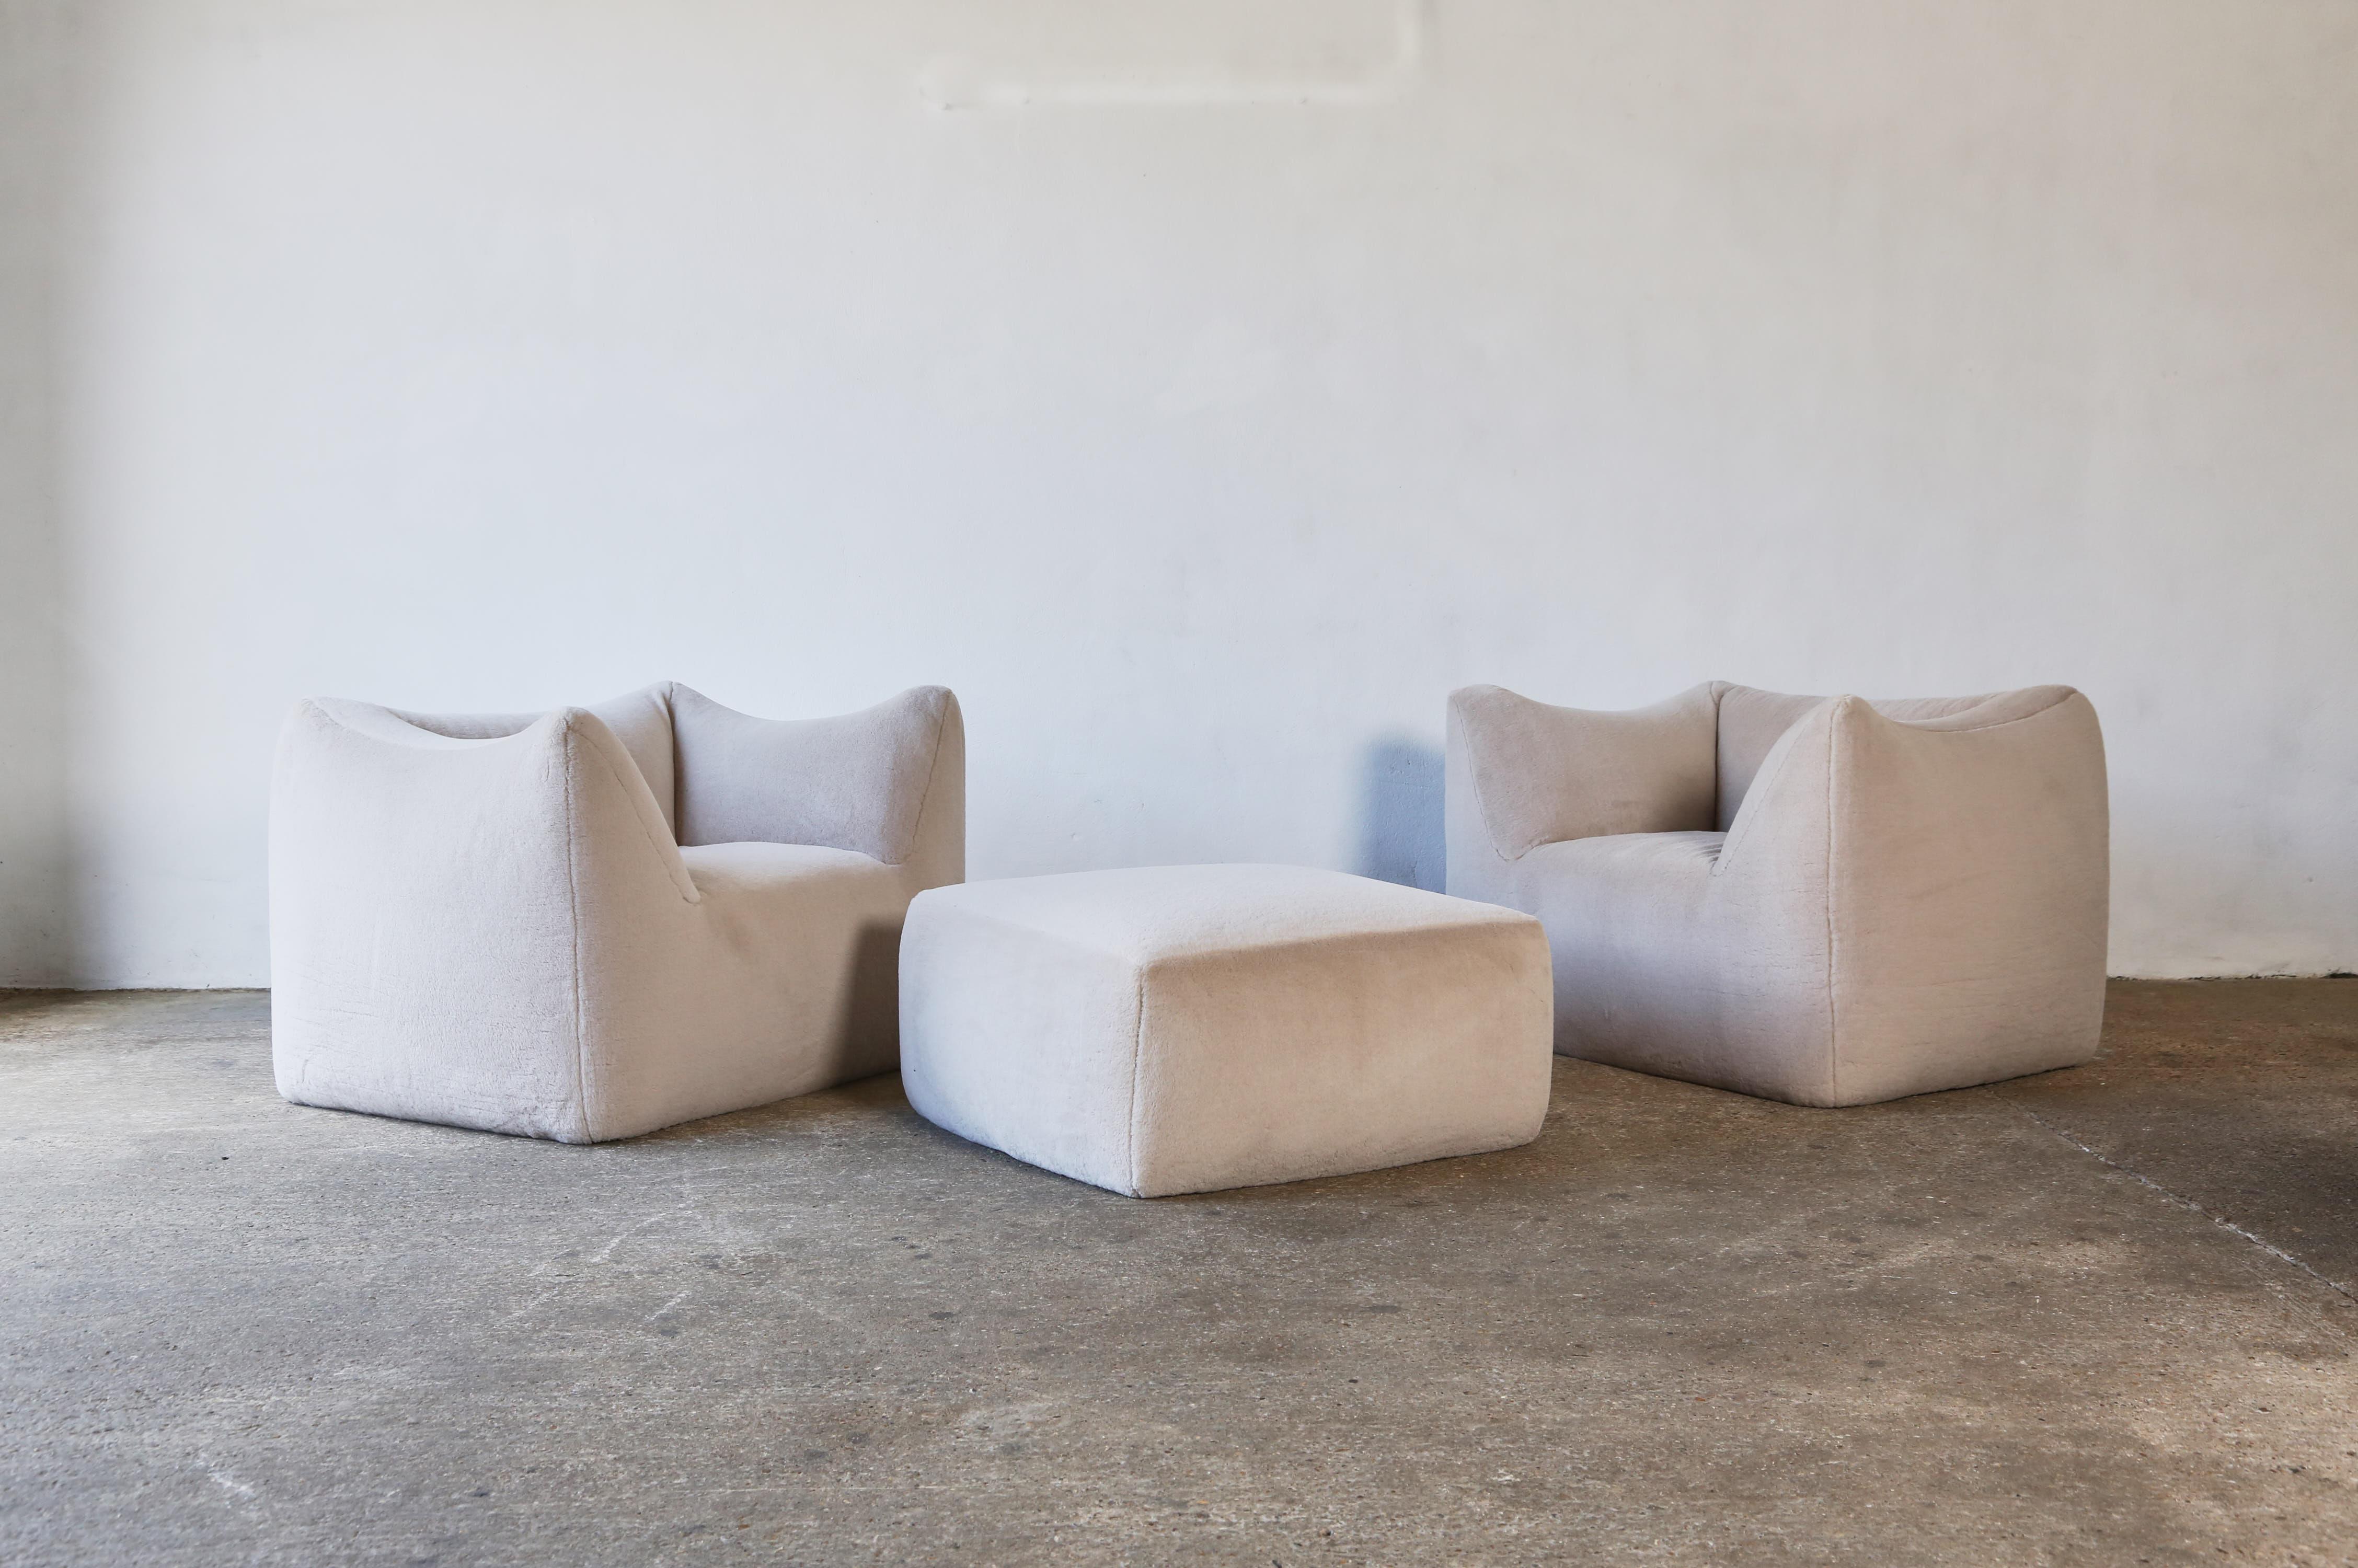 A beautiful pair of Mario Bellini Le Bambole lounge chairs and ottoman, newly upholstered in a premium ivory 100% Alpaca fabric, produced by B&B Italia, Italy in the 1970s. Fast shipping worldwide.

Chairs - h73 sh44 w120 d95cm
Ottoman - h42 w90